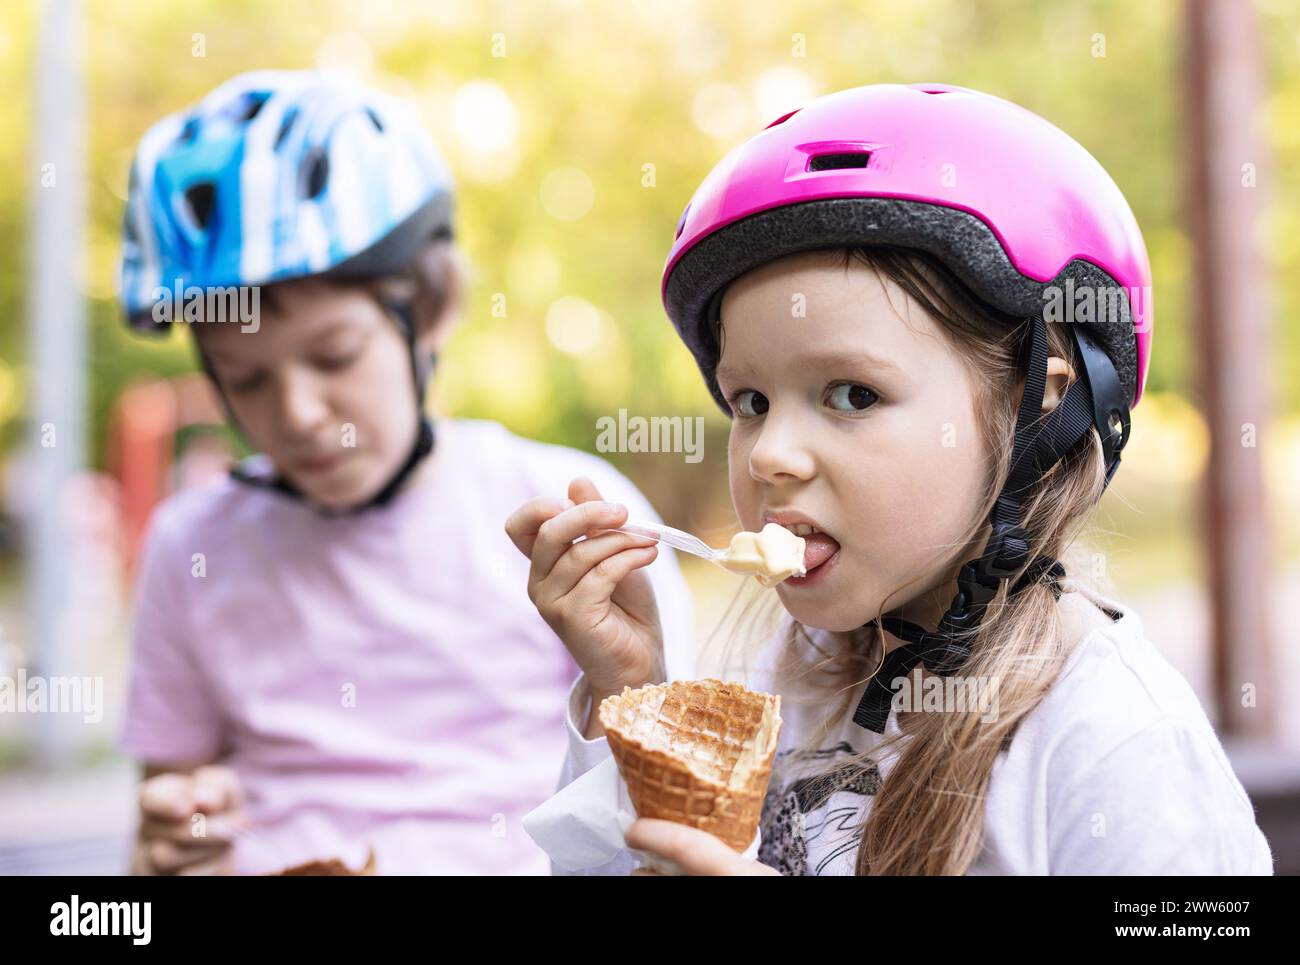 Young girl and boy eating ice cream and wearing helmets outdoors Stock Photo